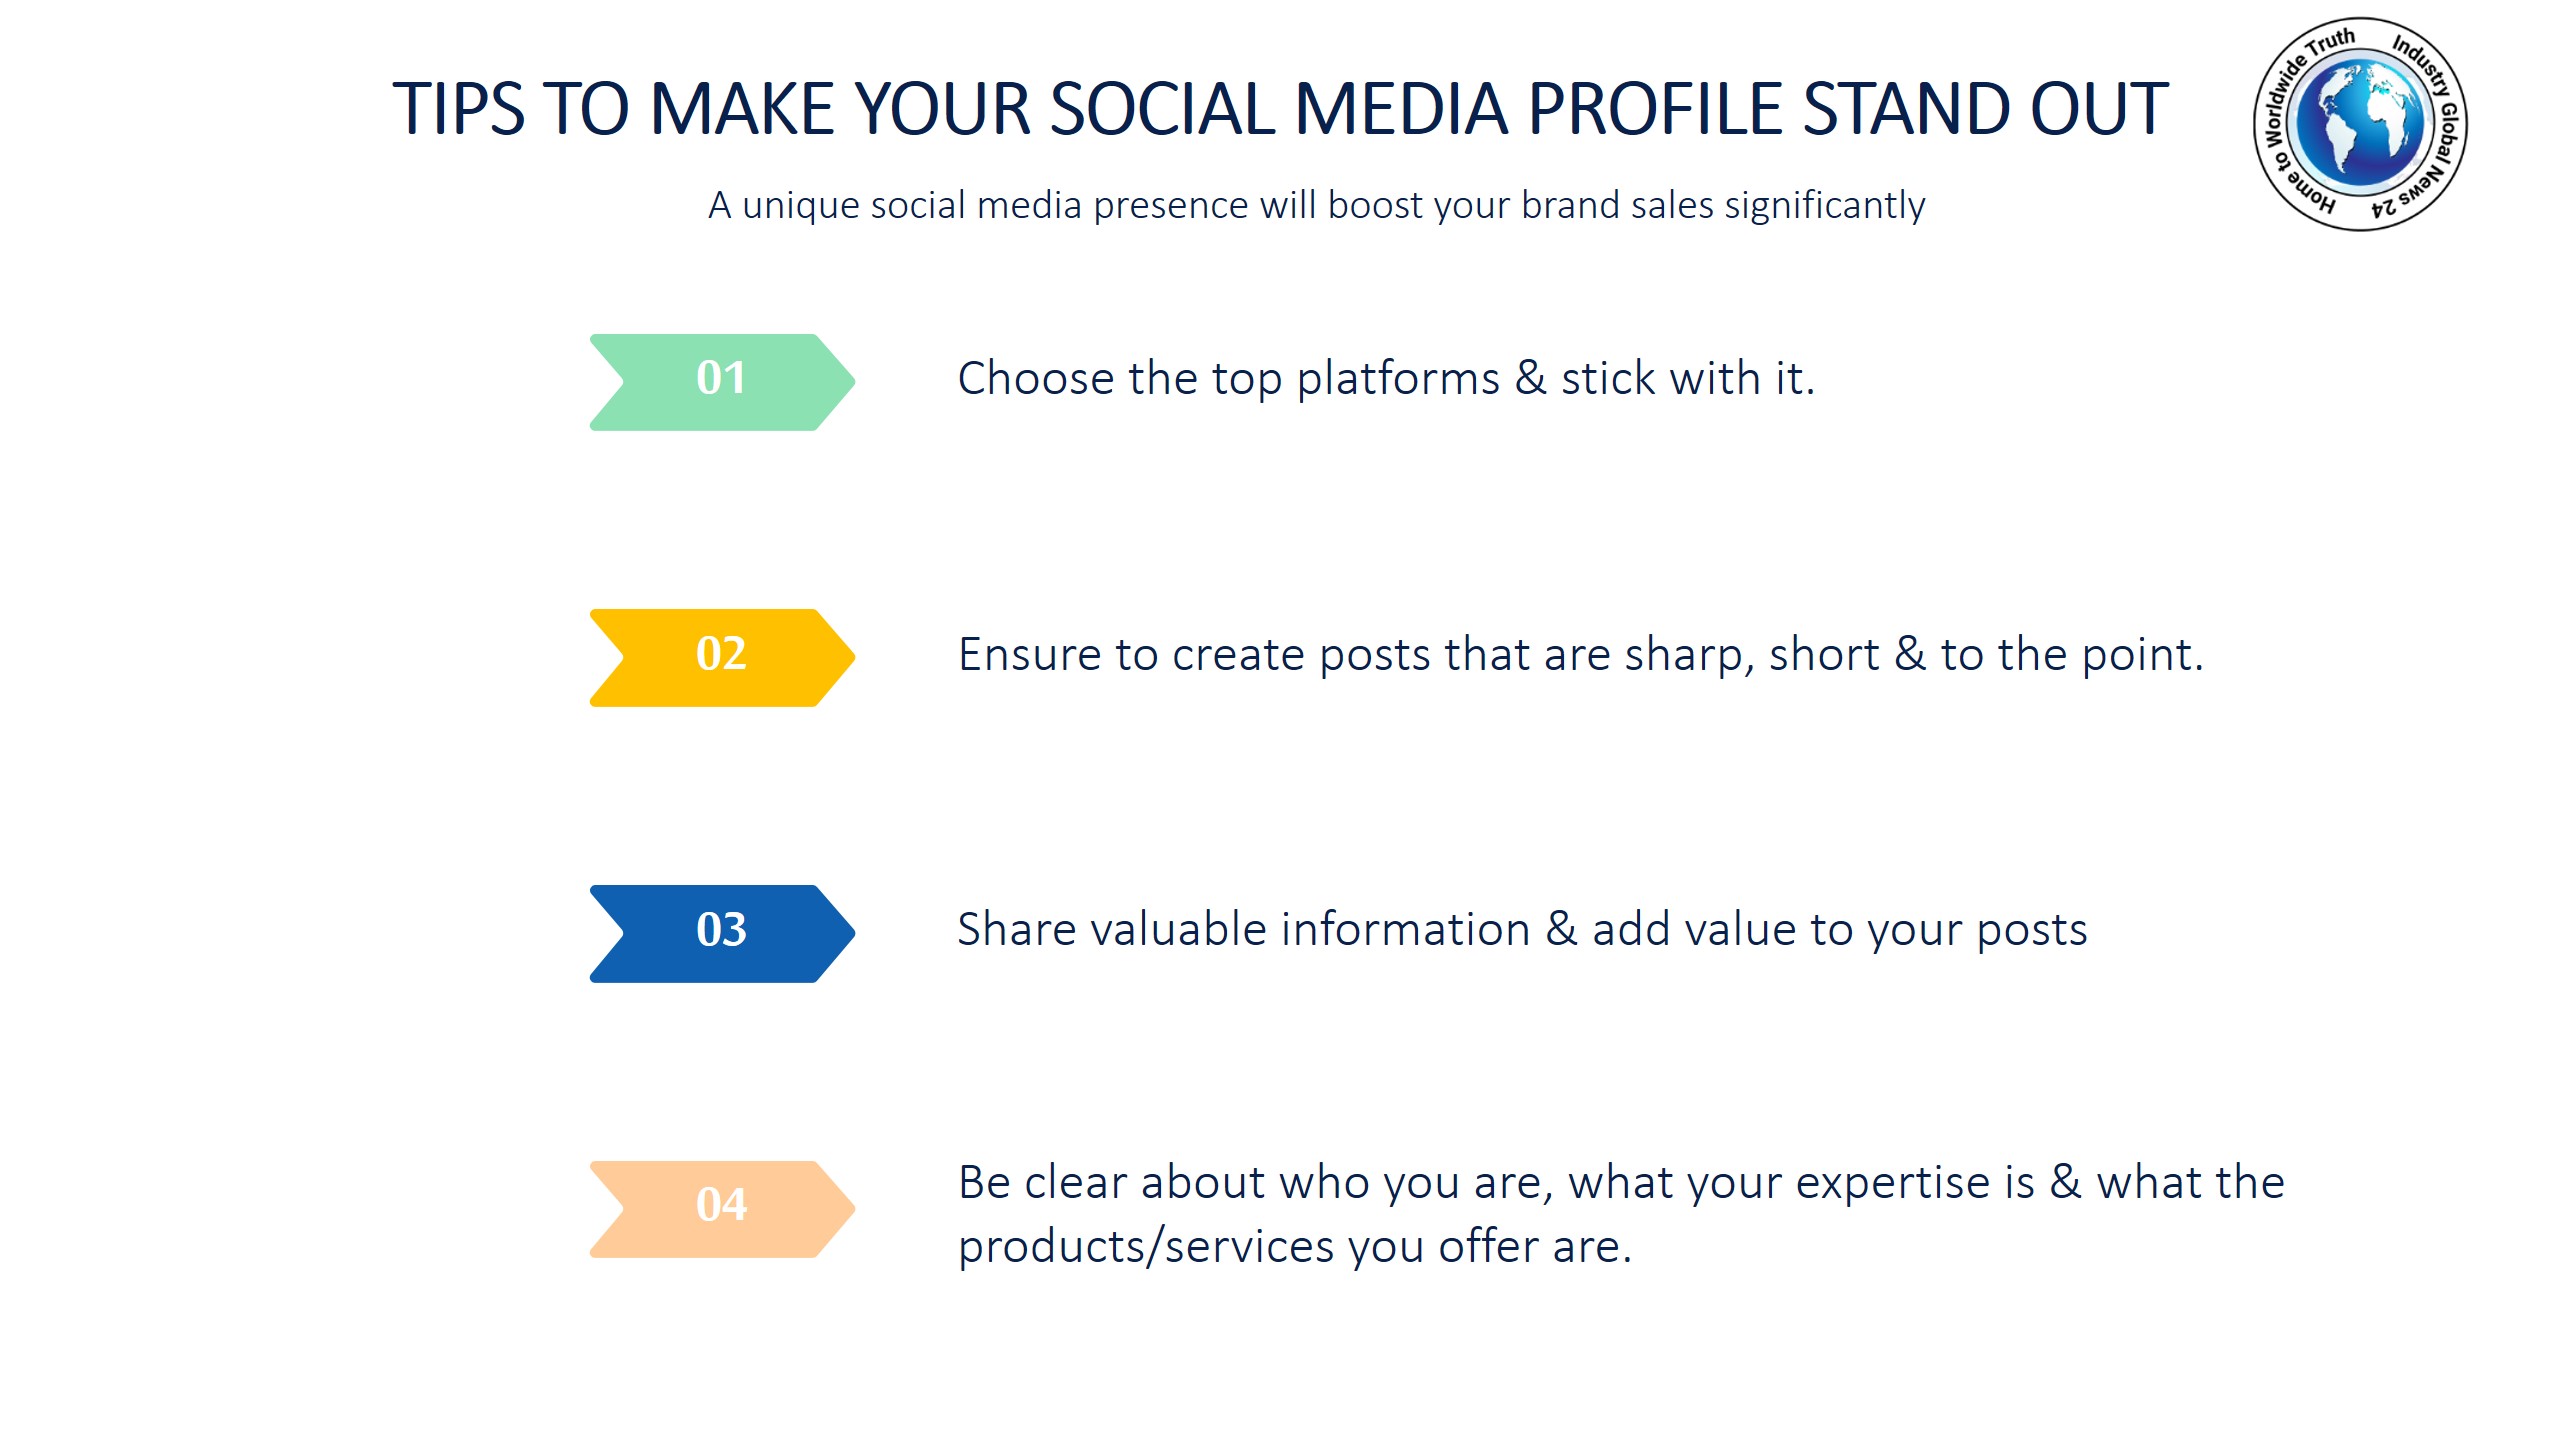 Tips to make your social media profile stand out